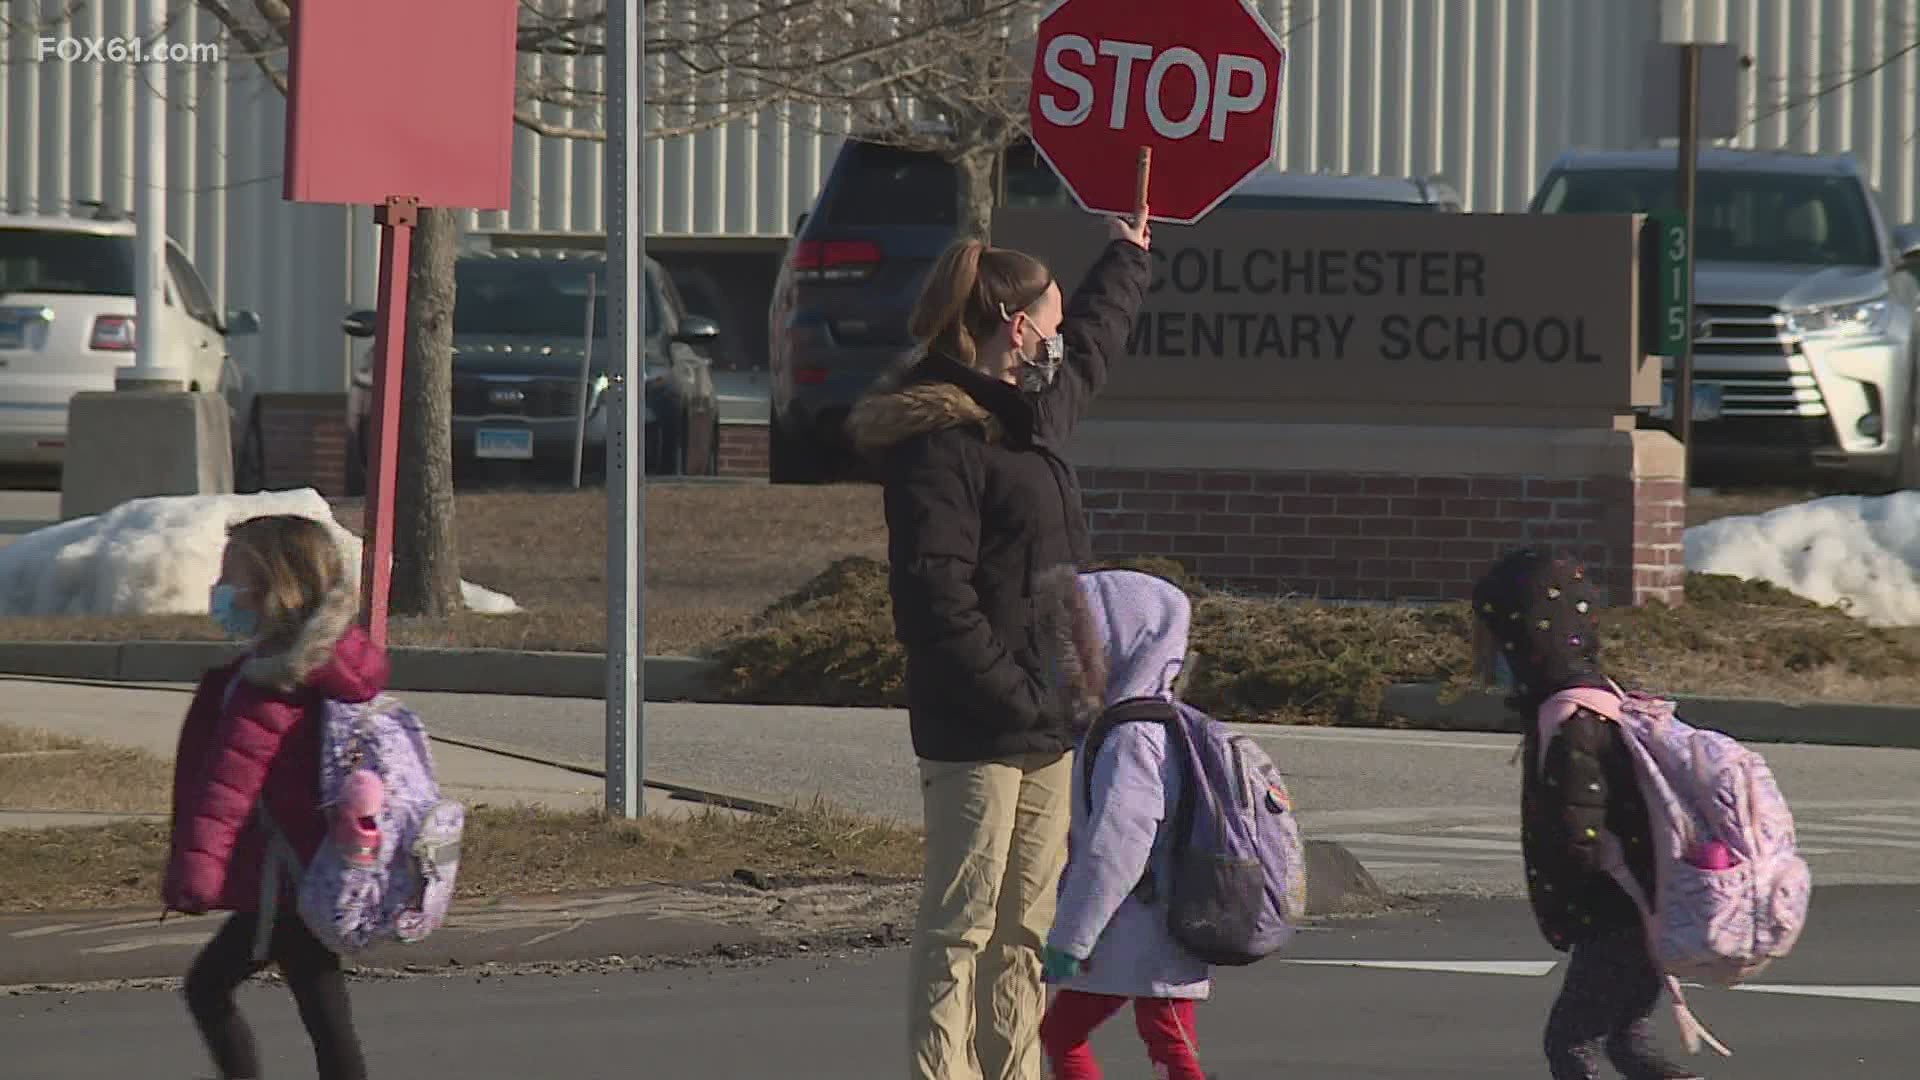 According to the superintendent, 17 staff members at Colchester Elementary called out Monday. It was a number that couldn’t be covered by substitutes.